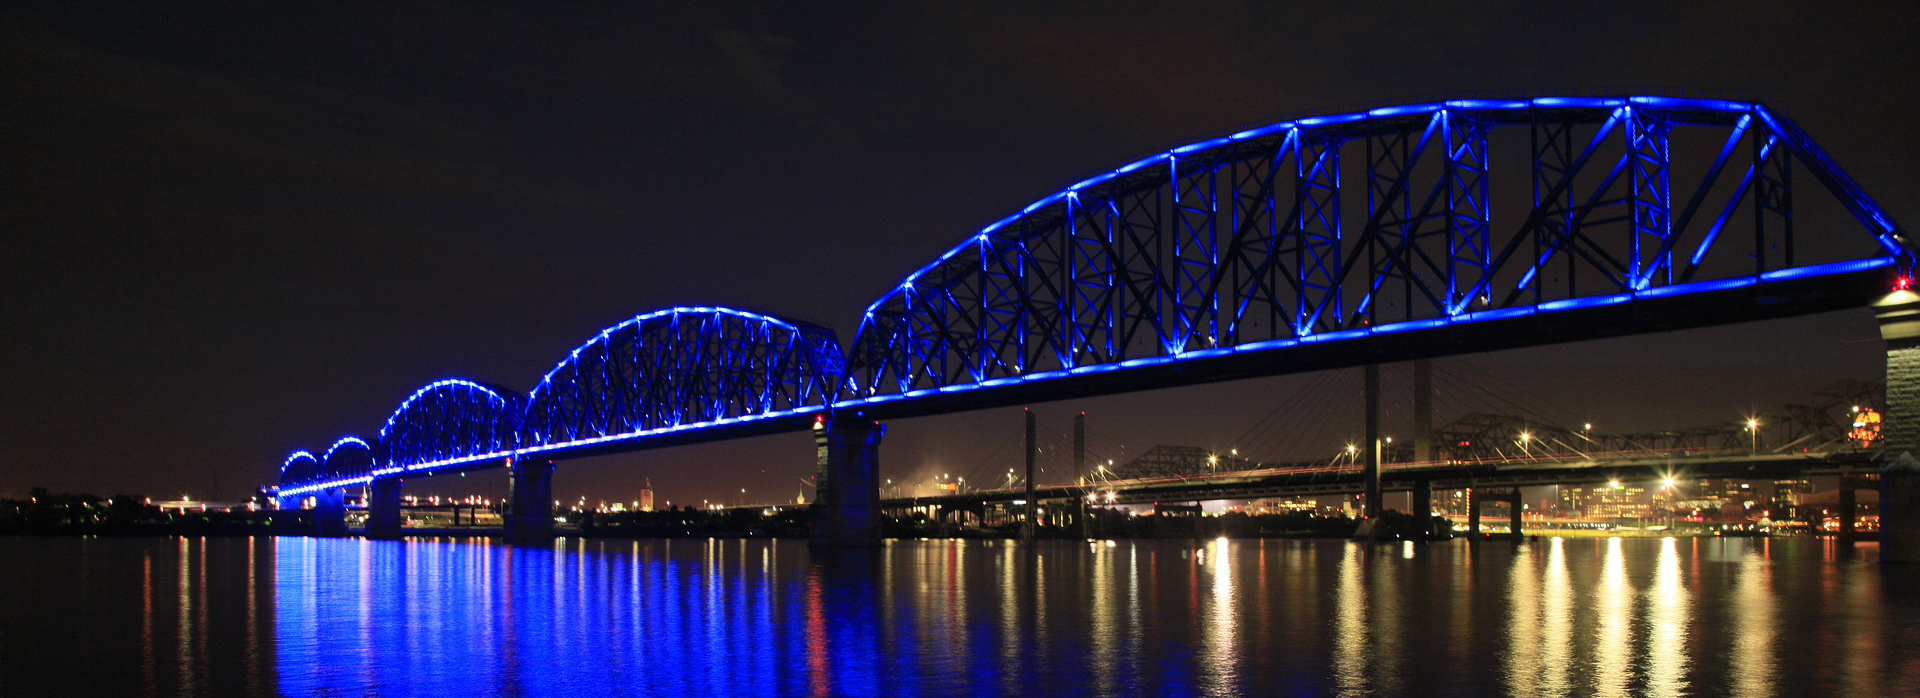 The Big Four Bridge in Louisville, Kentucky | Breast Cancer Car Donations